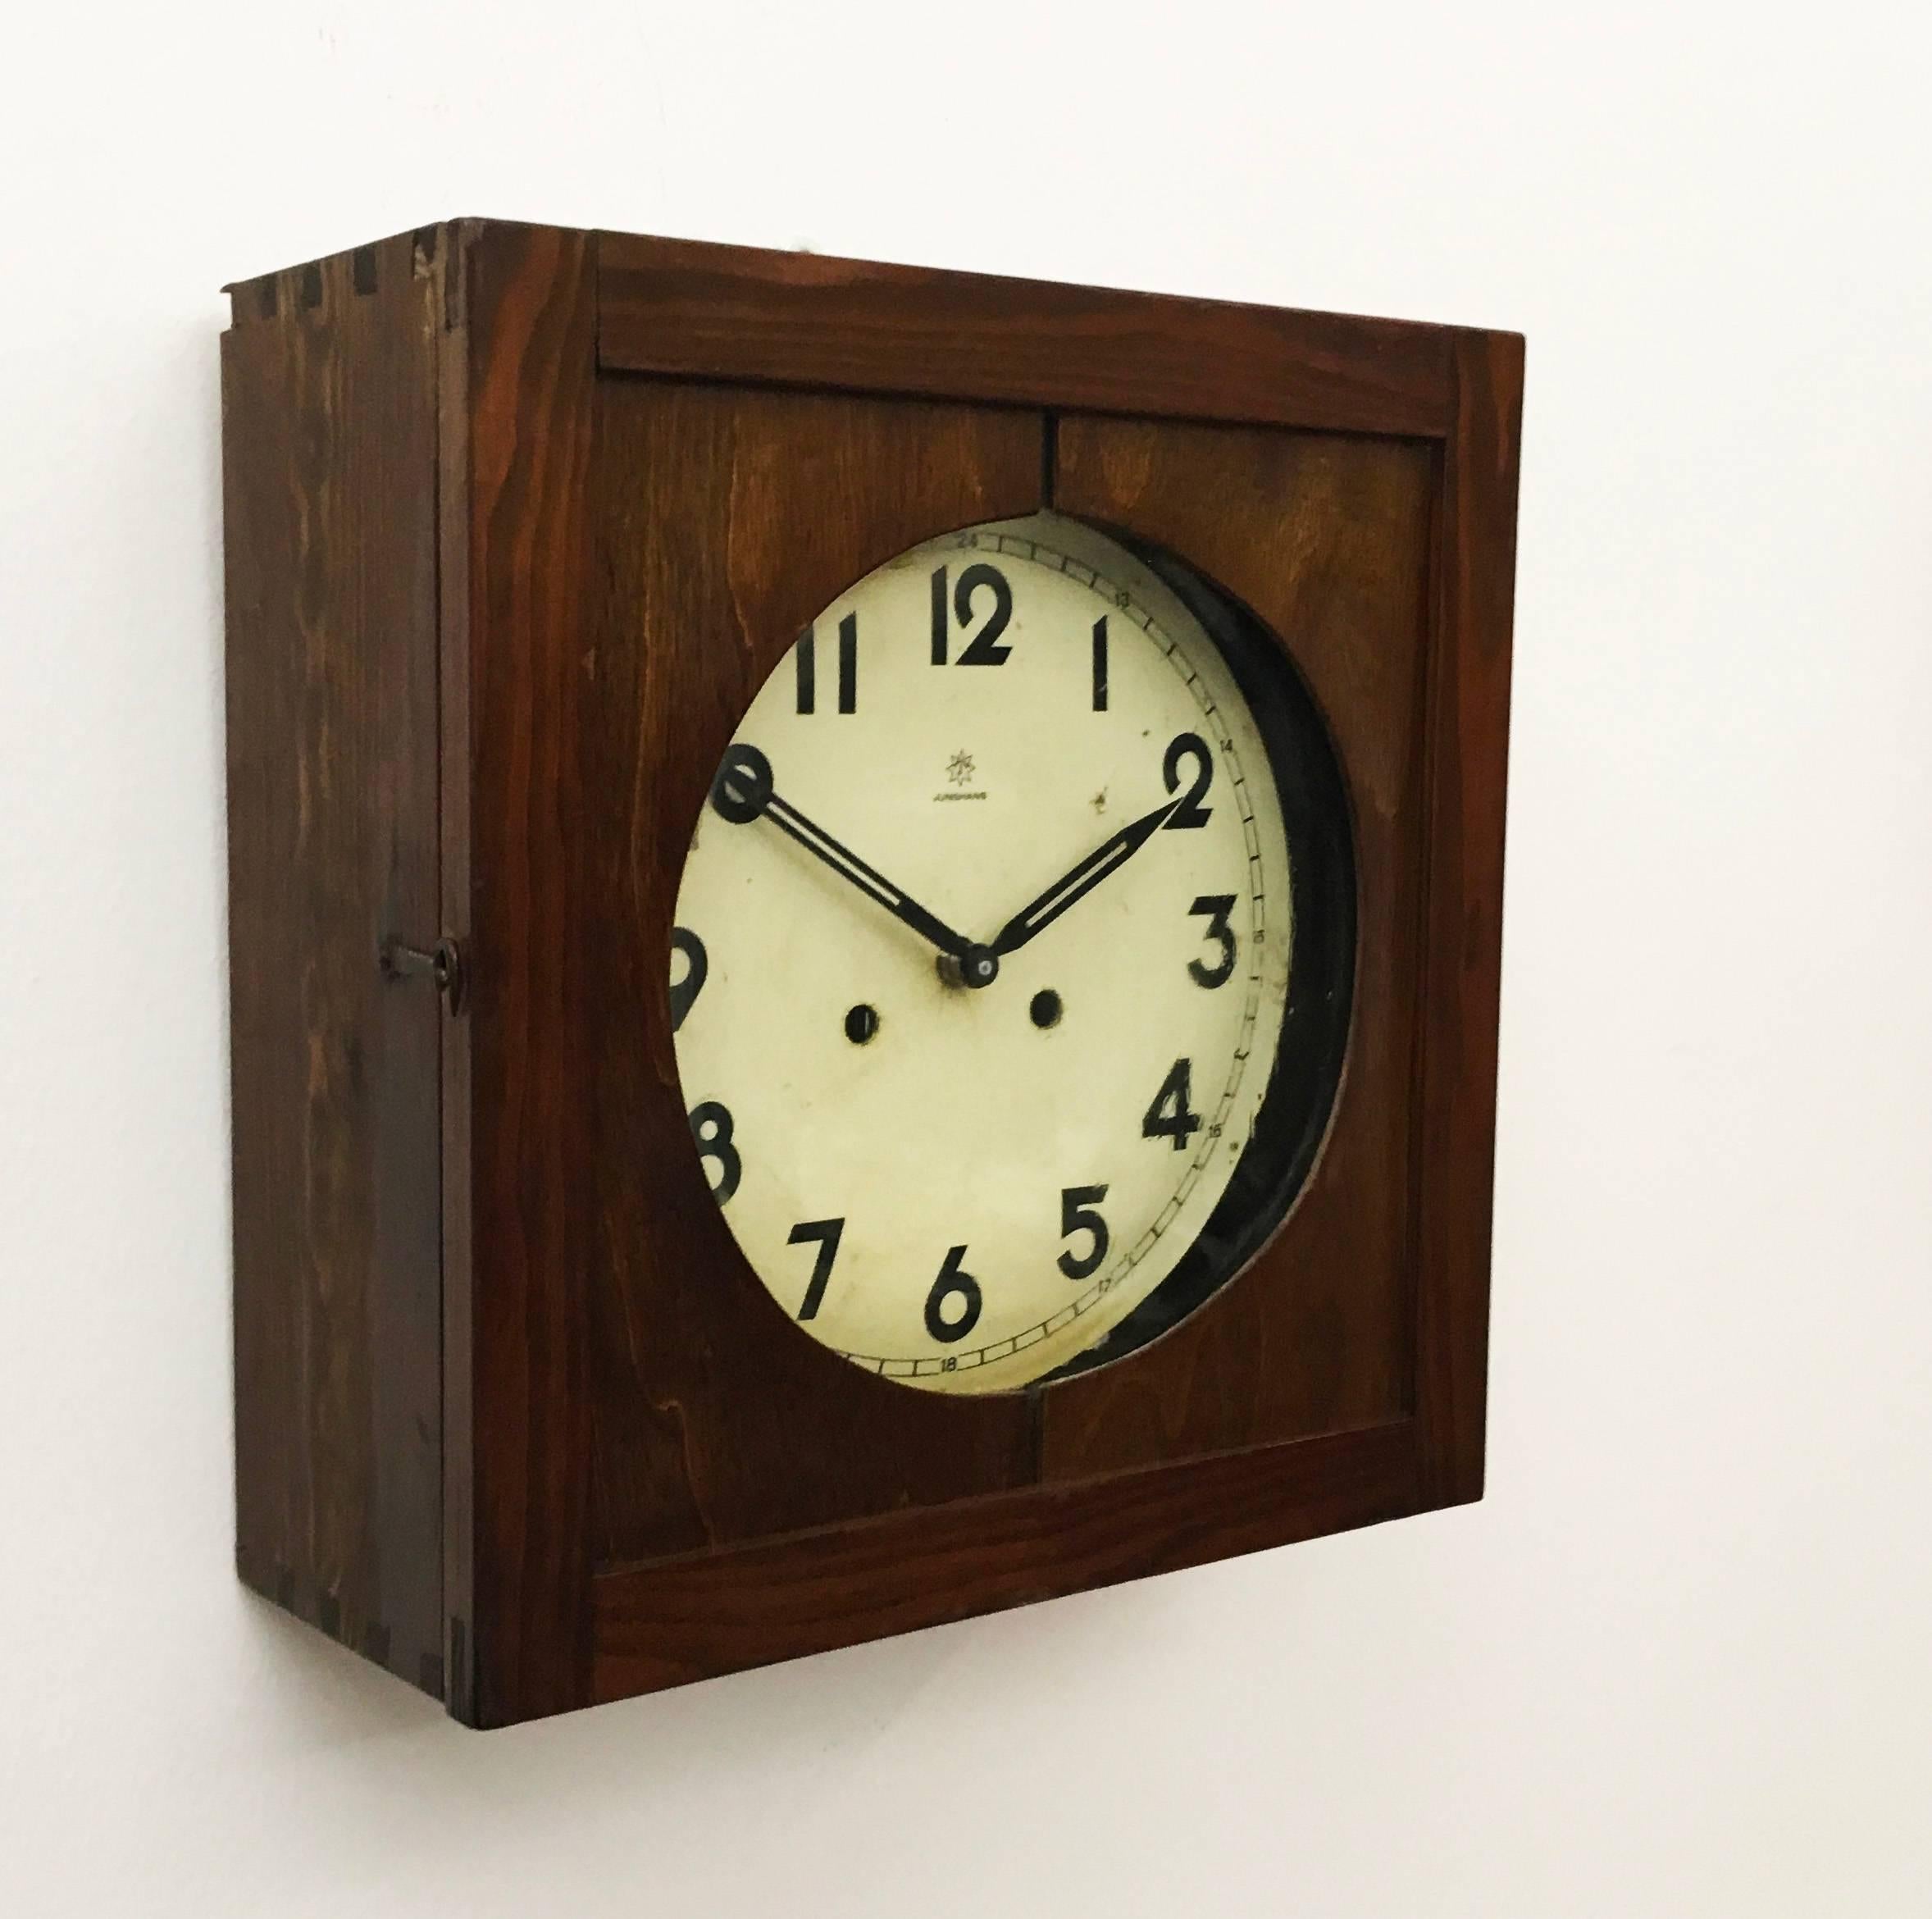 Wood box, clock face with Arabic numbers, restored new battery movement.